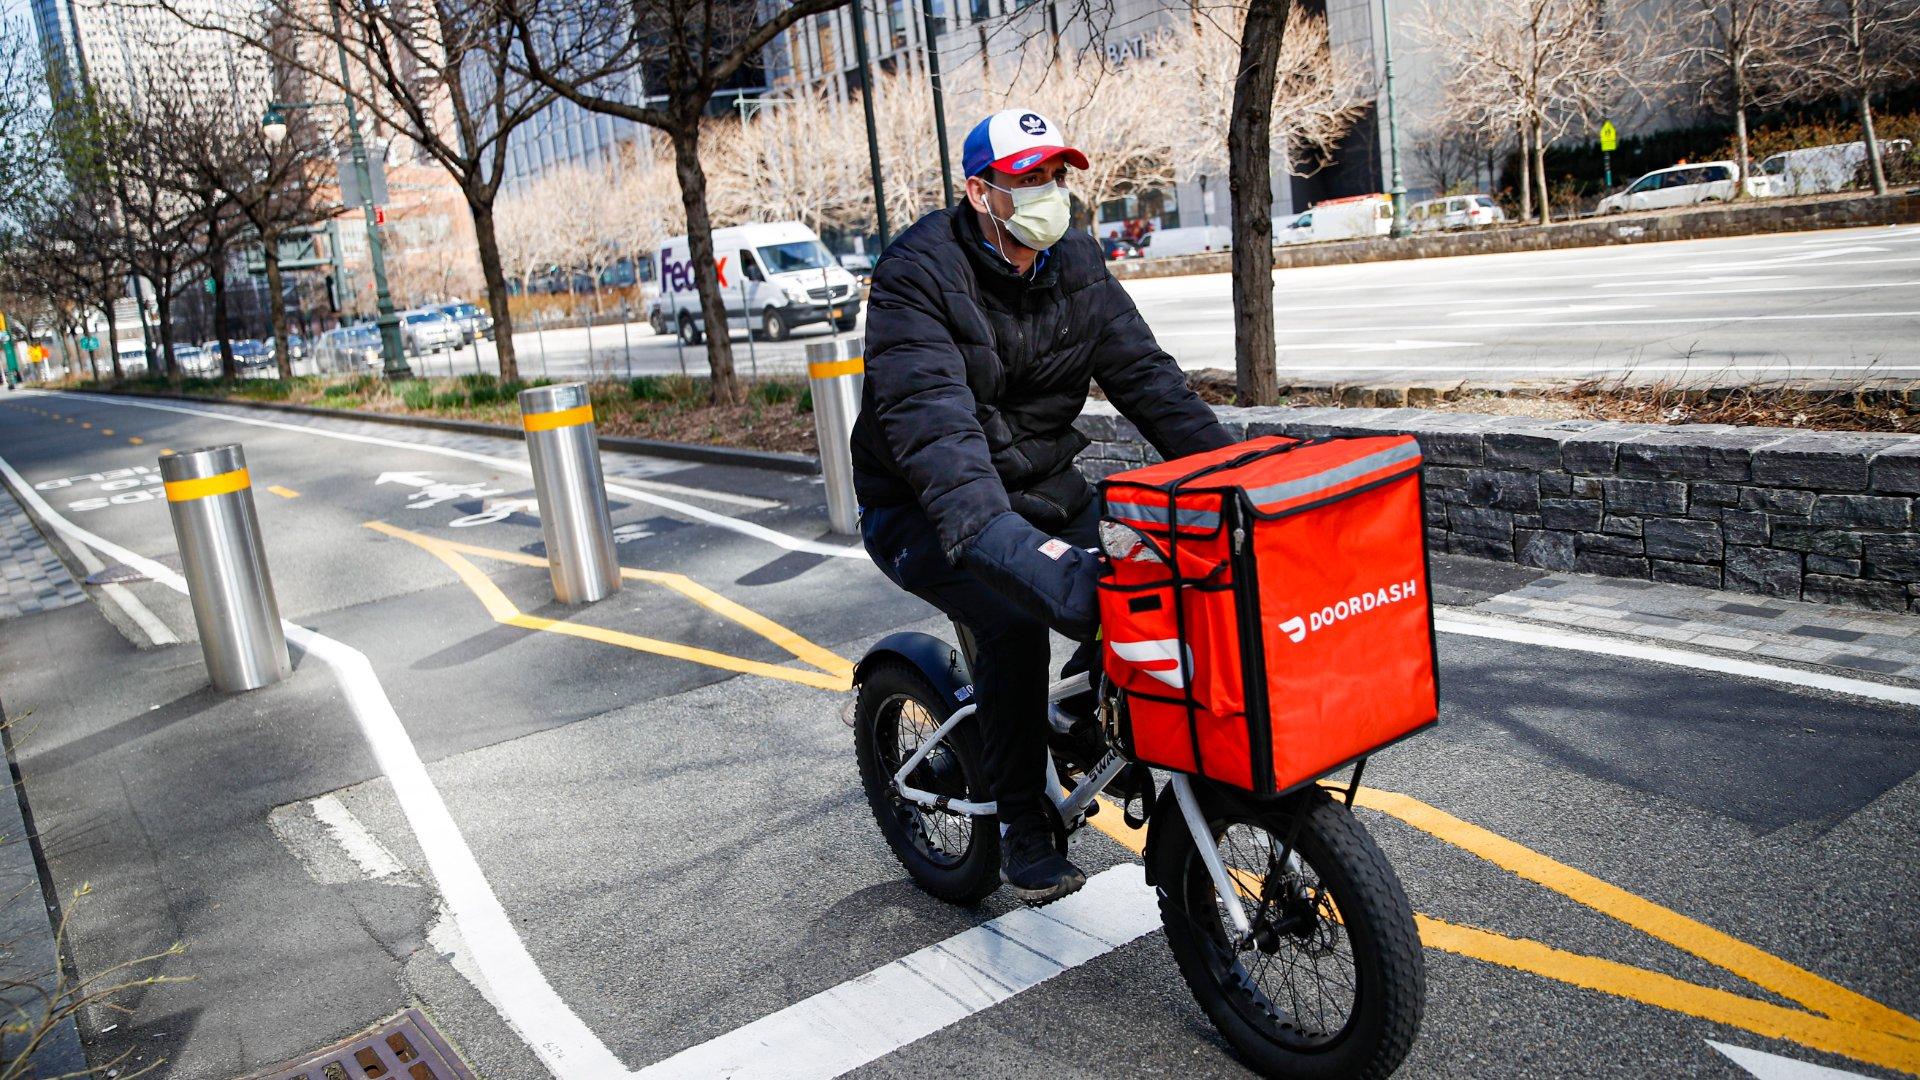 In this March 16, 2020 file photo, a delivery worker rides his bicycle along a path on the West Side Highway in New York. (AP Photo / John Minchillo, File)